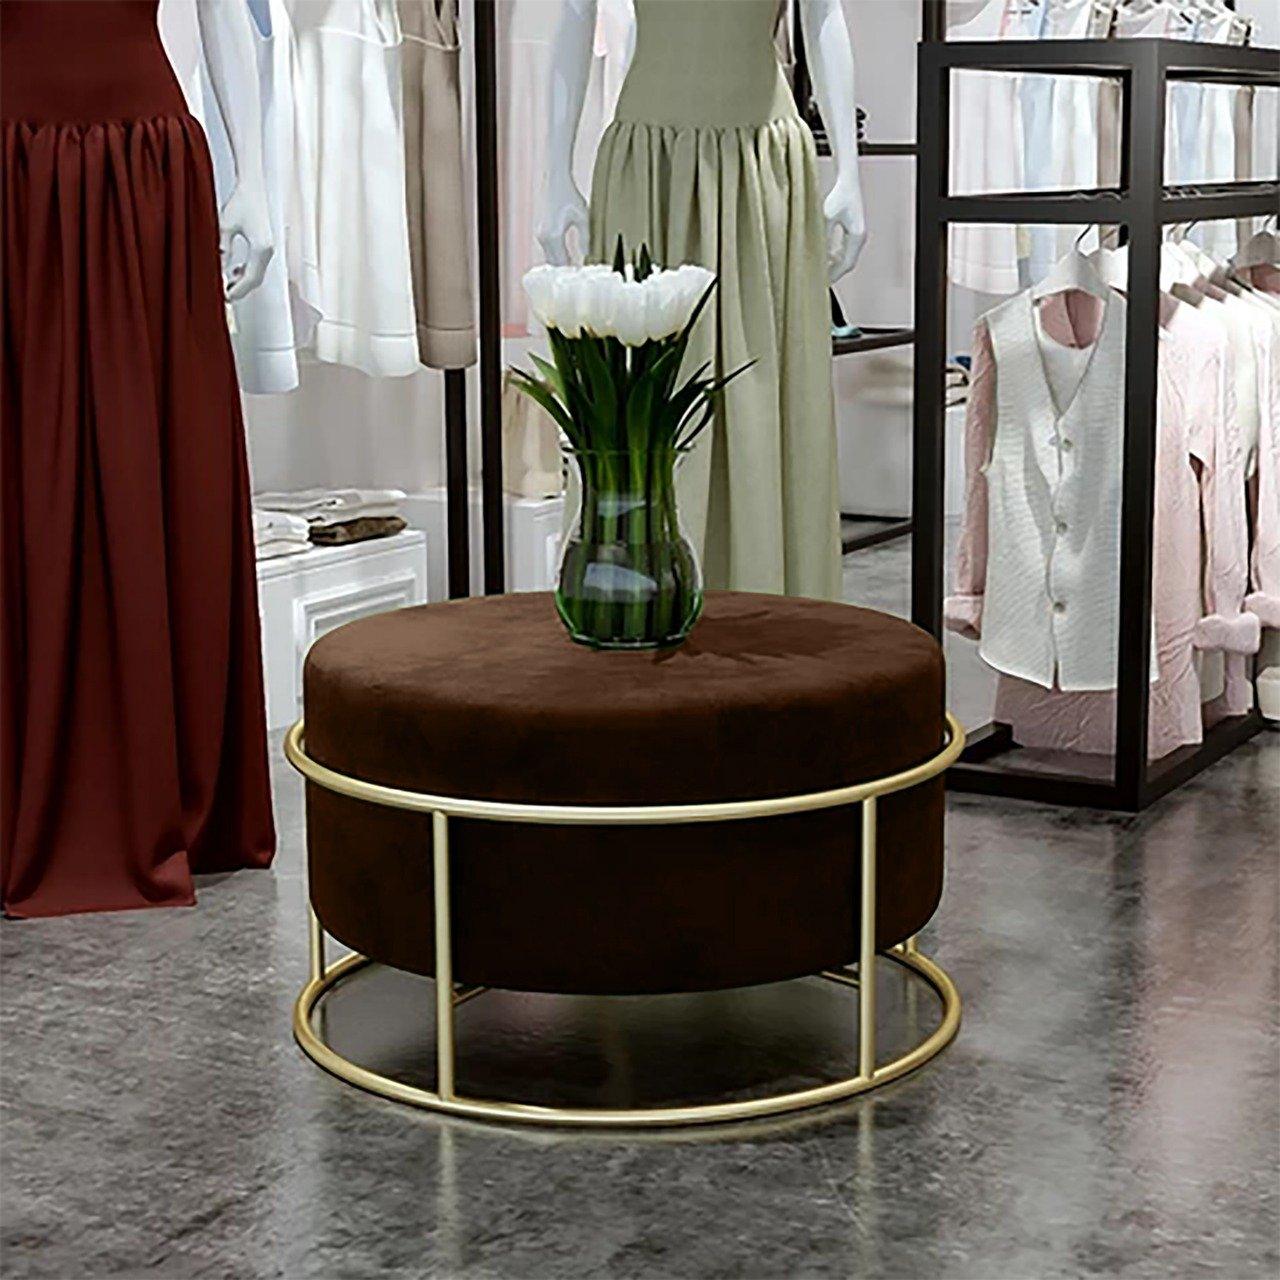 Luxury Wooden Round stool With Steel Stand -307 - 92Bedding